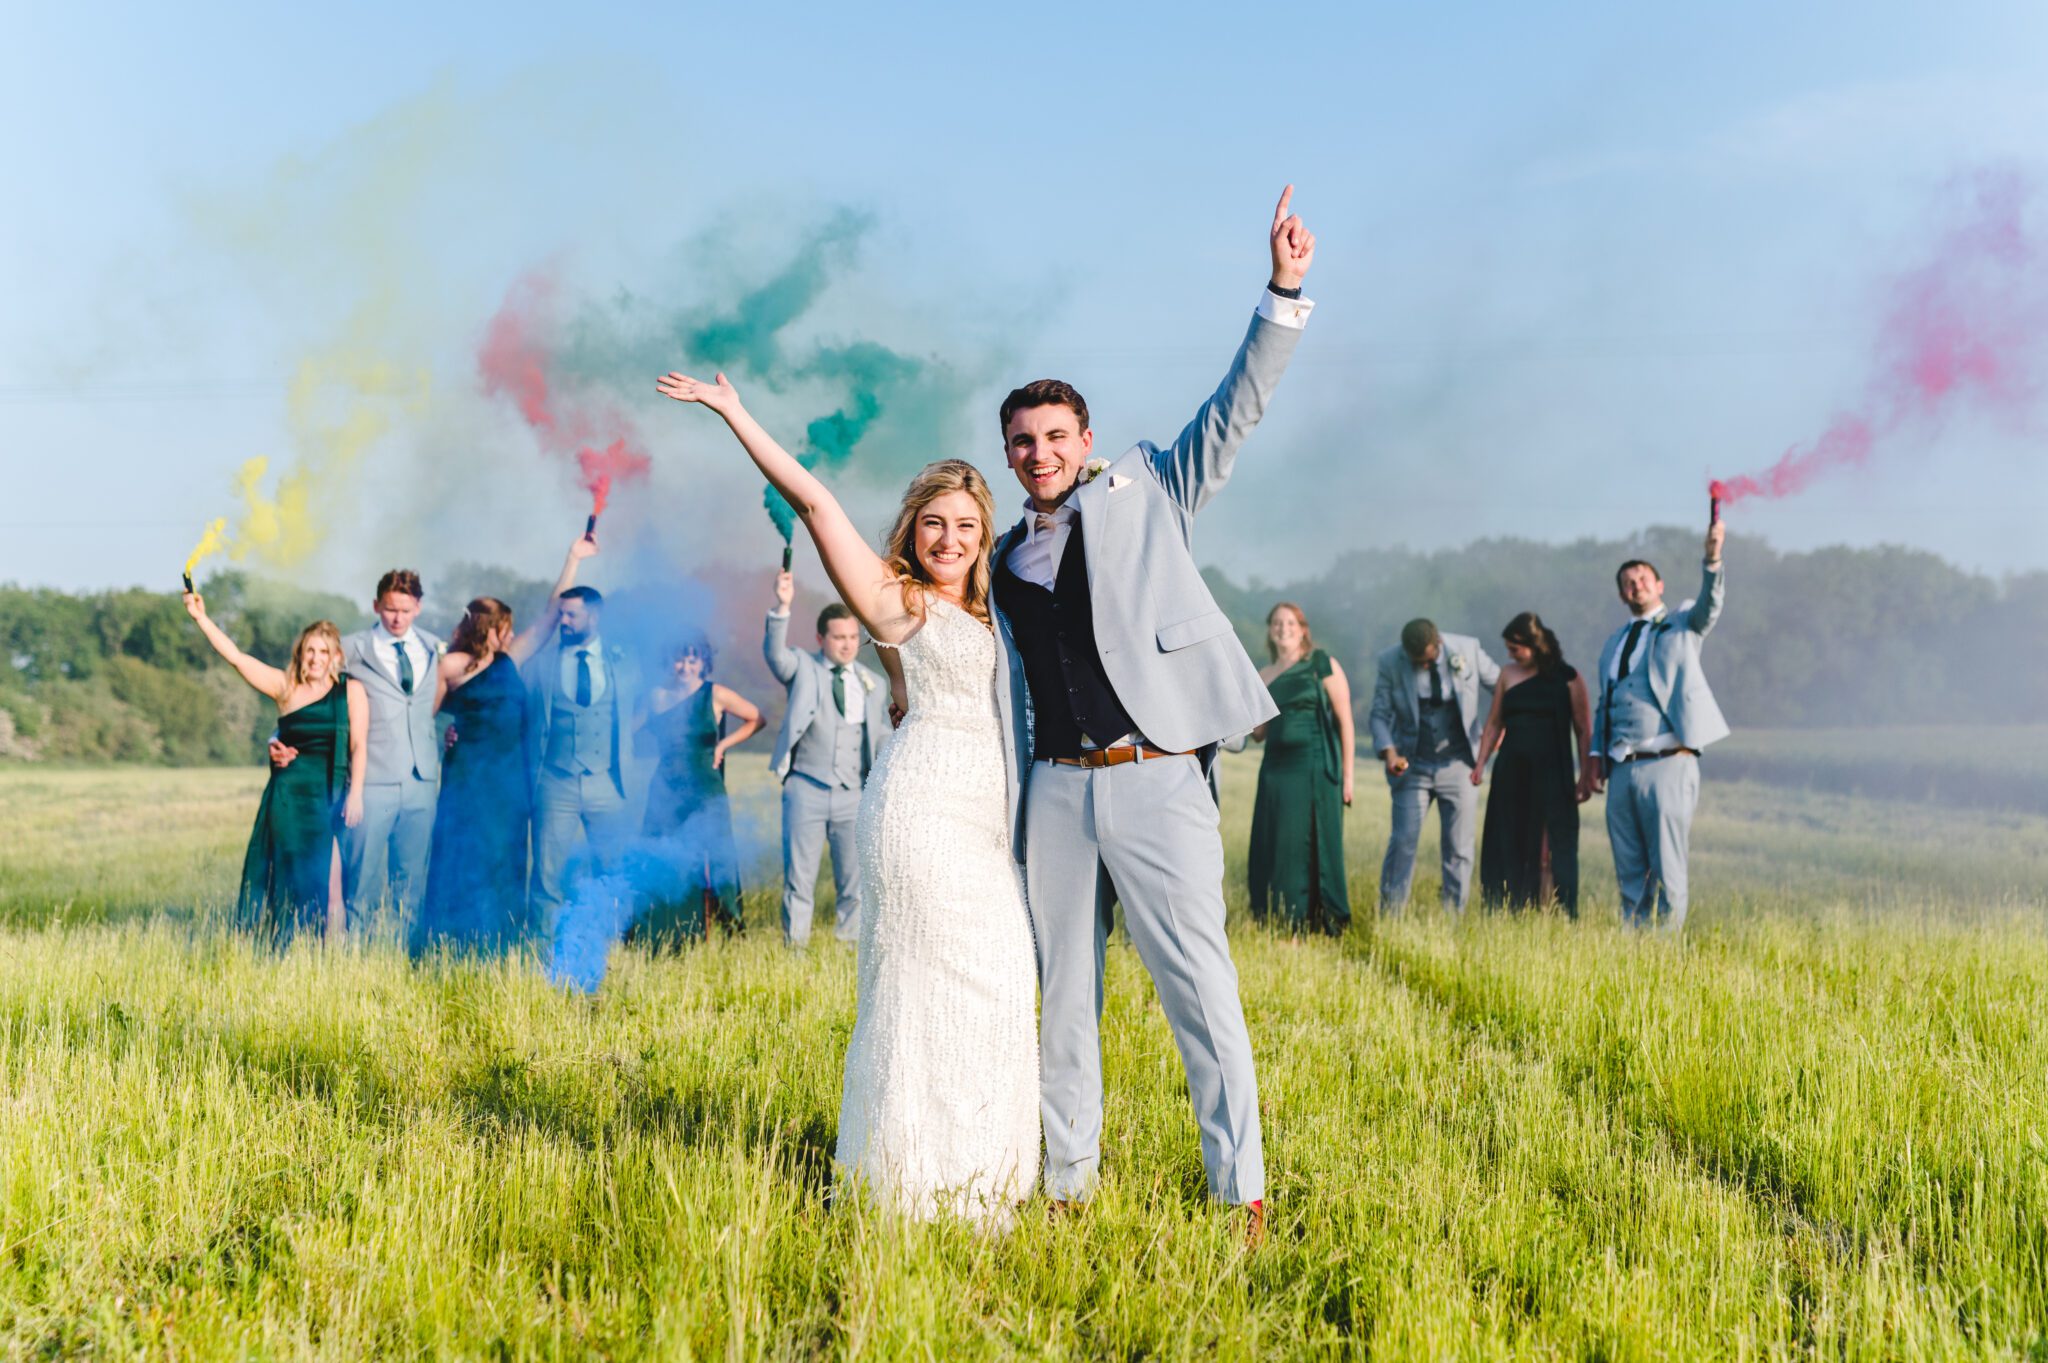 A happy bride and groom standing in front of their bridesmaids and groomsmen with arms aloft